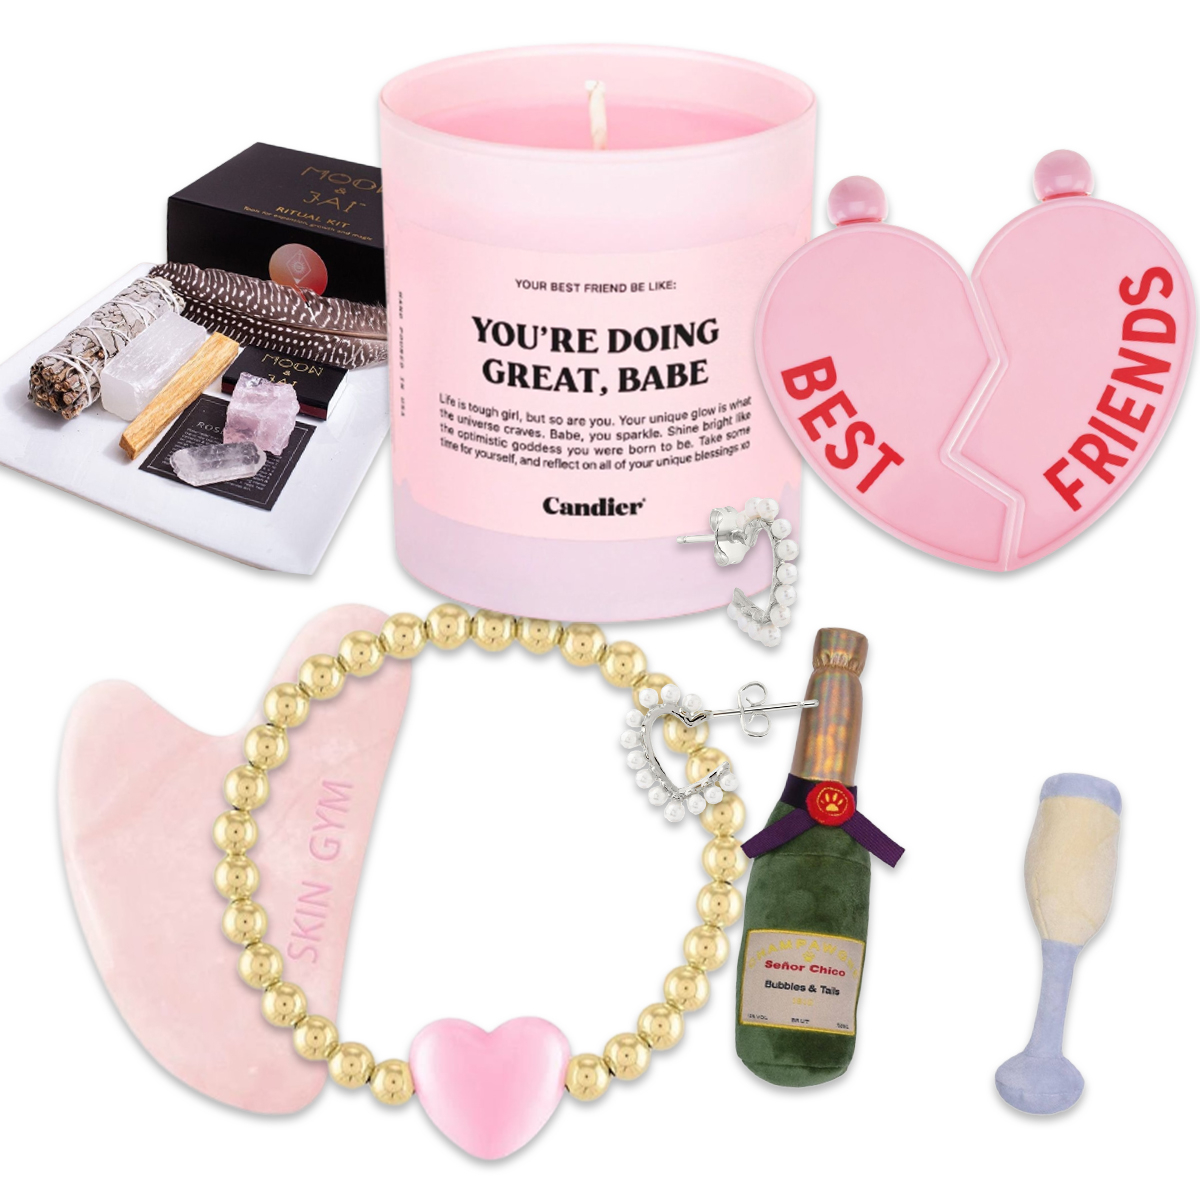 56 best Galentine's Day gift ideas for your friends